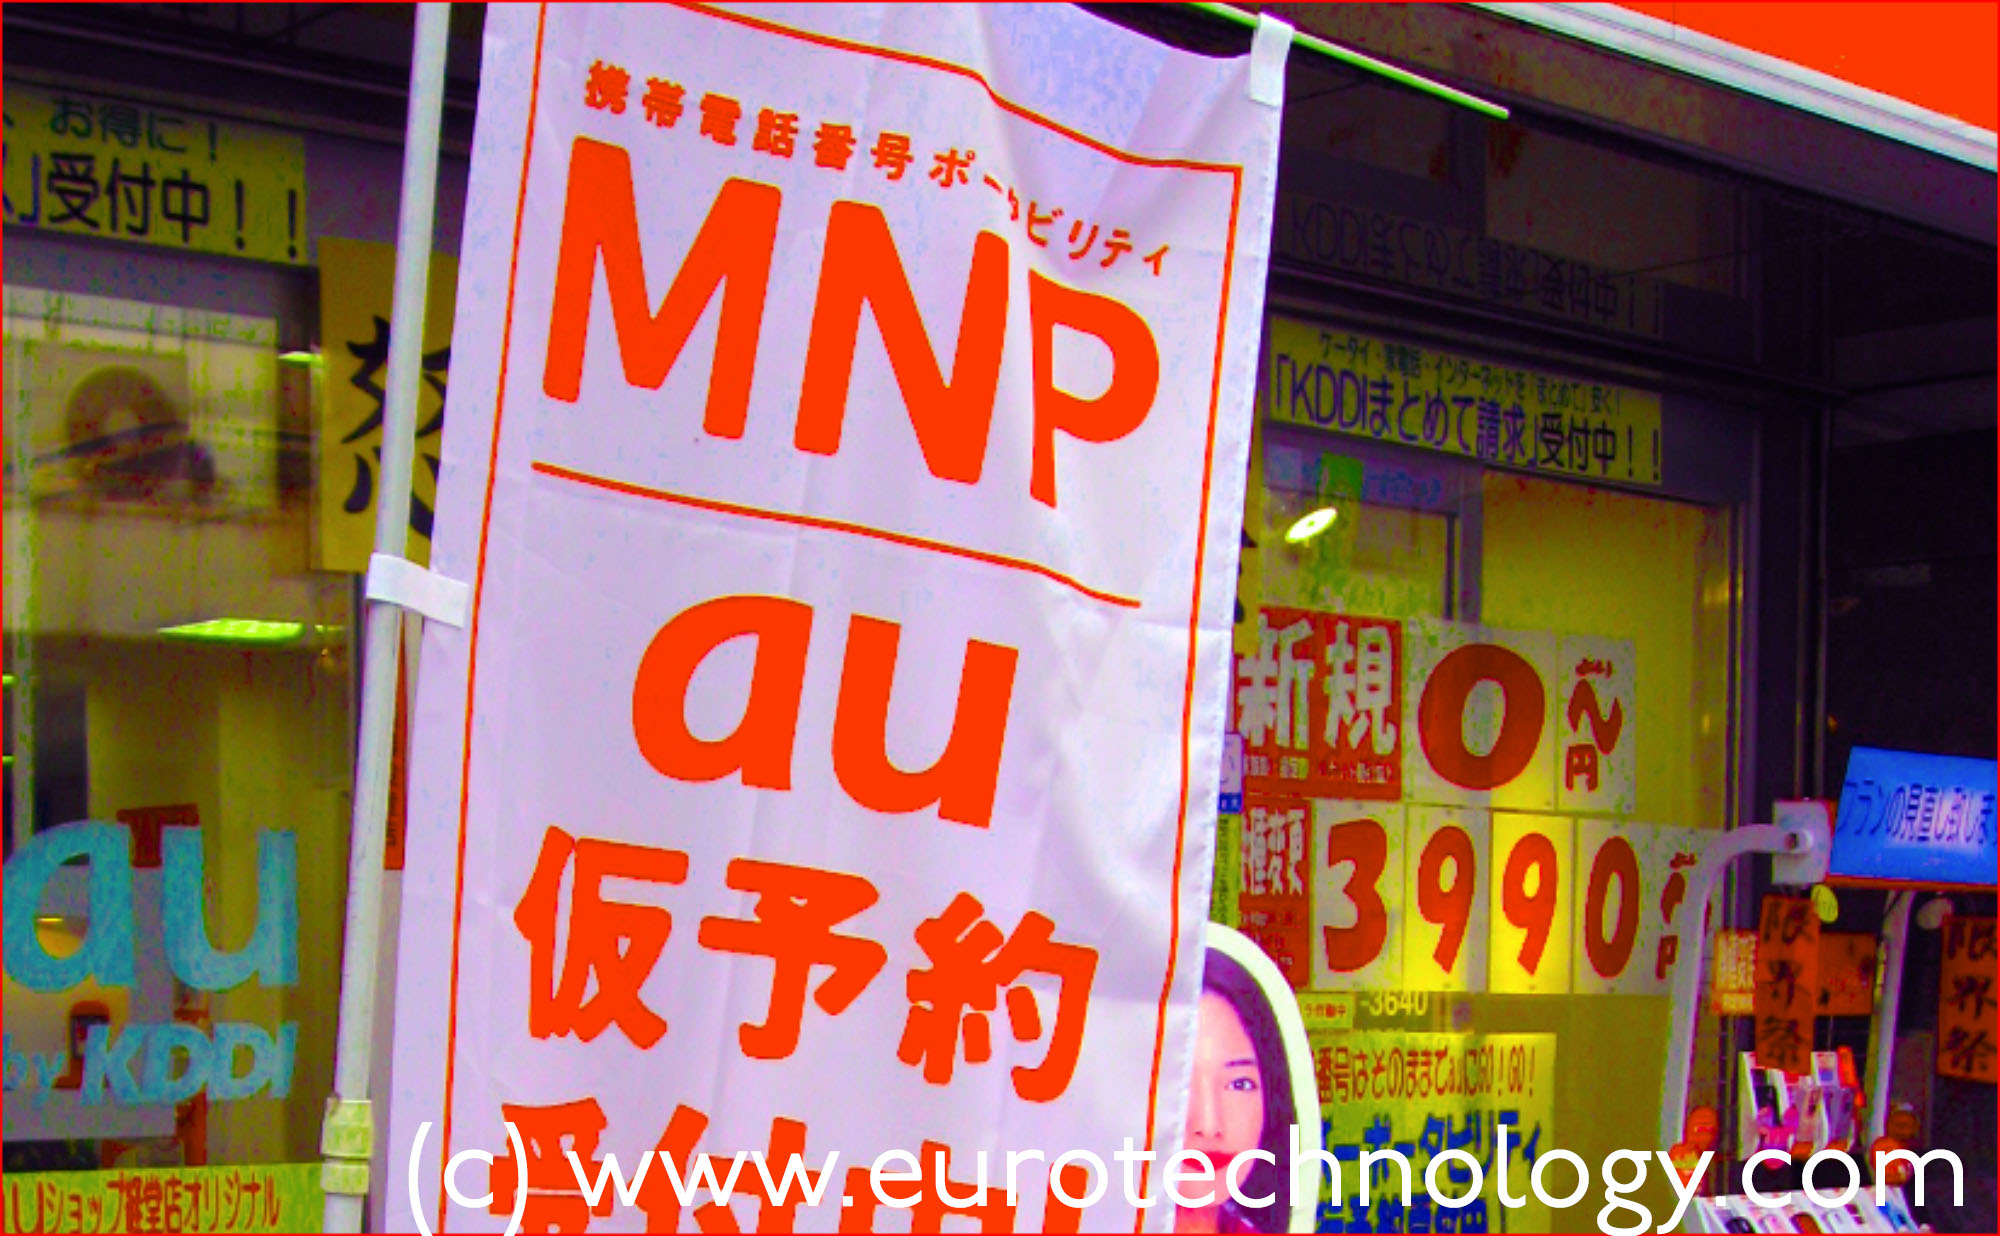 Mobile Number Portability (MNP) in Japan